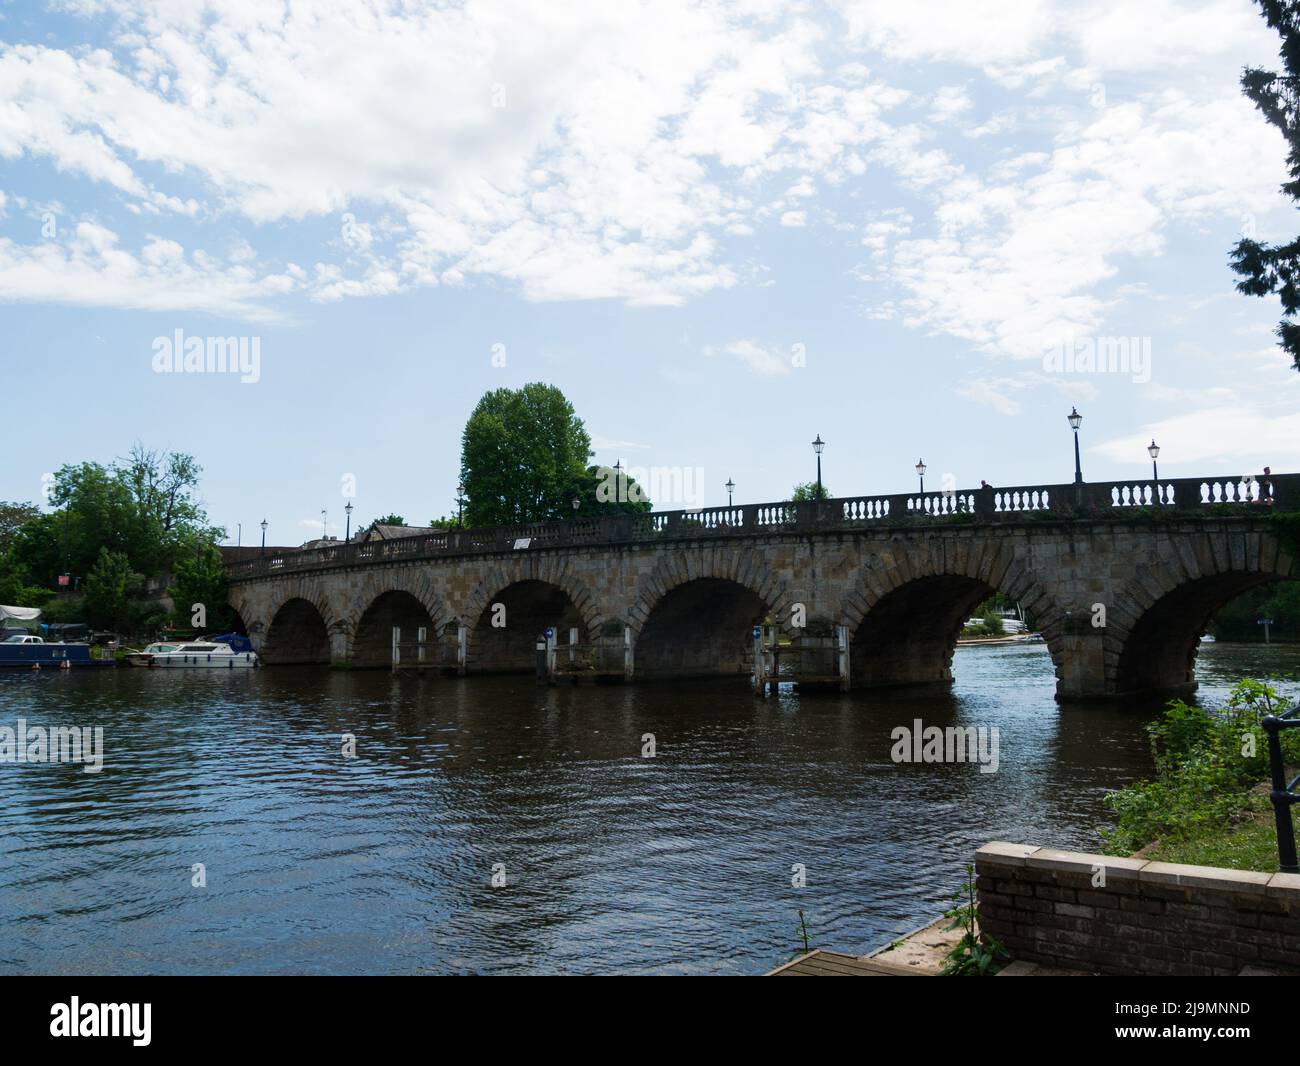 Henley Road Bridge  built in 1786 at Henley-on-Thames over the River Thames, between Oxfordshire and Berkshire with five elliptical stone arches, and Stock Photo